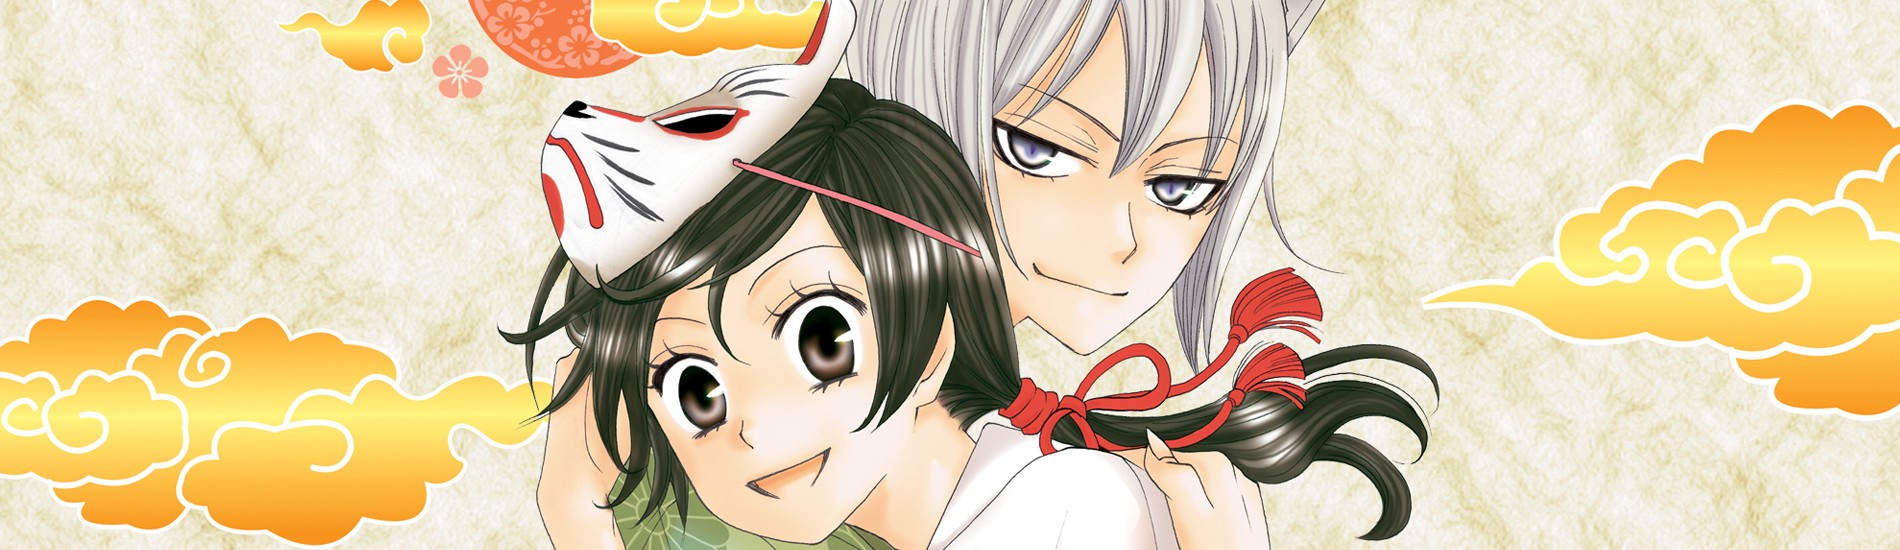 On Mythic Creatures and Looking Through Kamisama Kiss